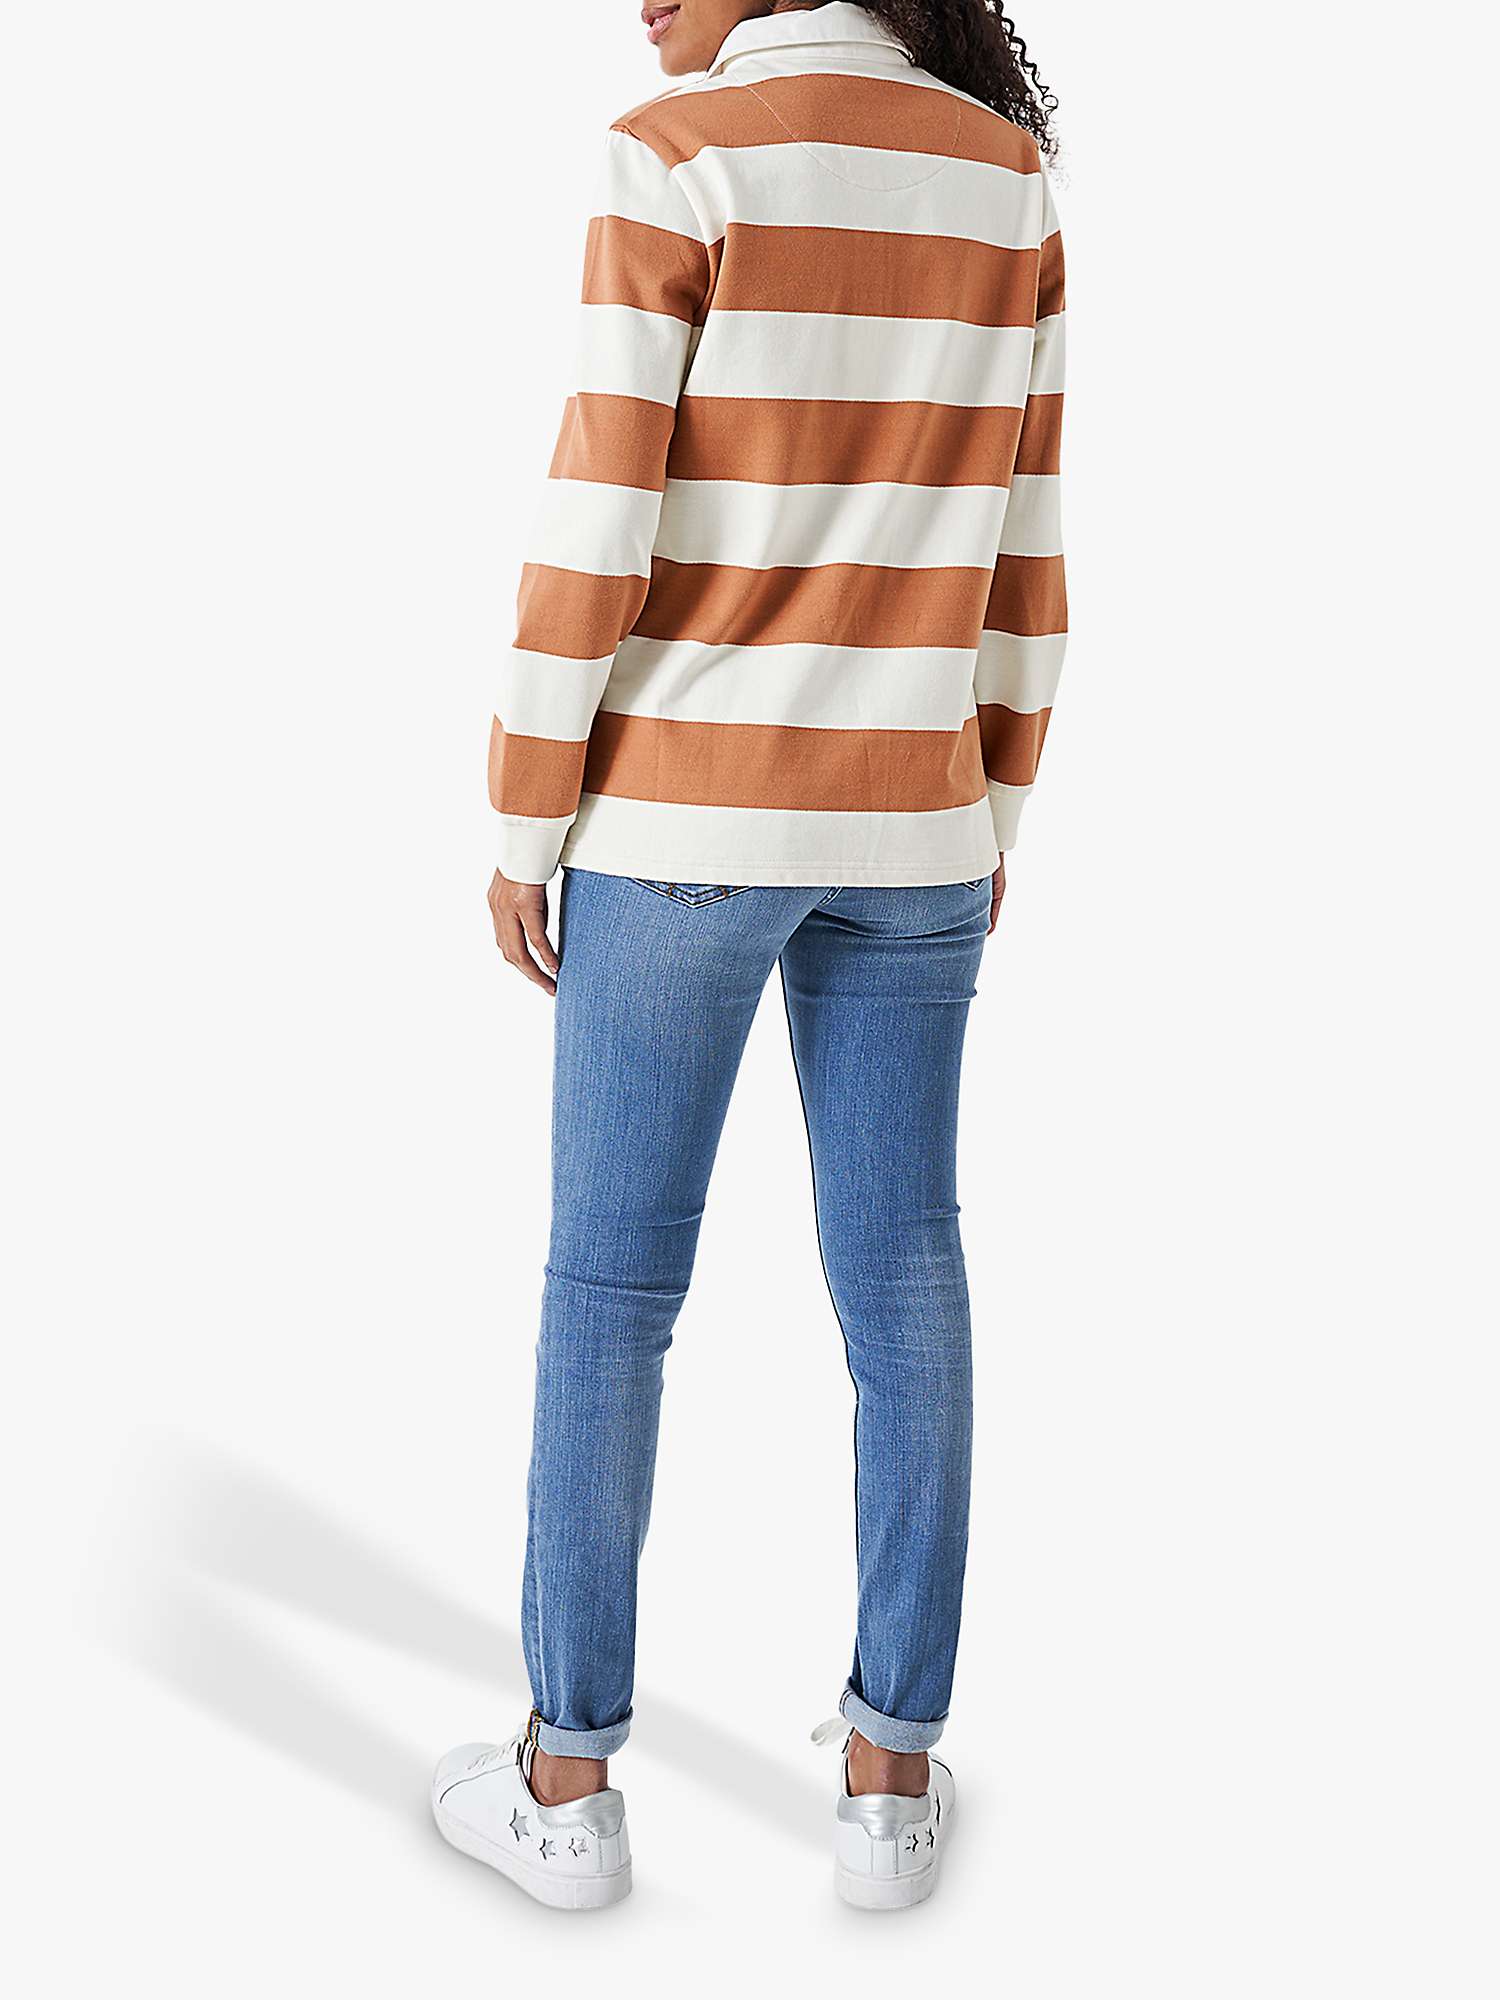 Buy Crew Clothing Anouk Stripe Rugby Shirt, Light Brown Online at johnlewis.com